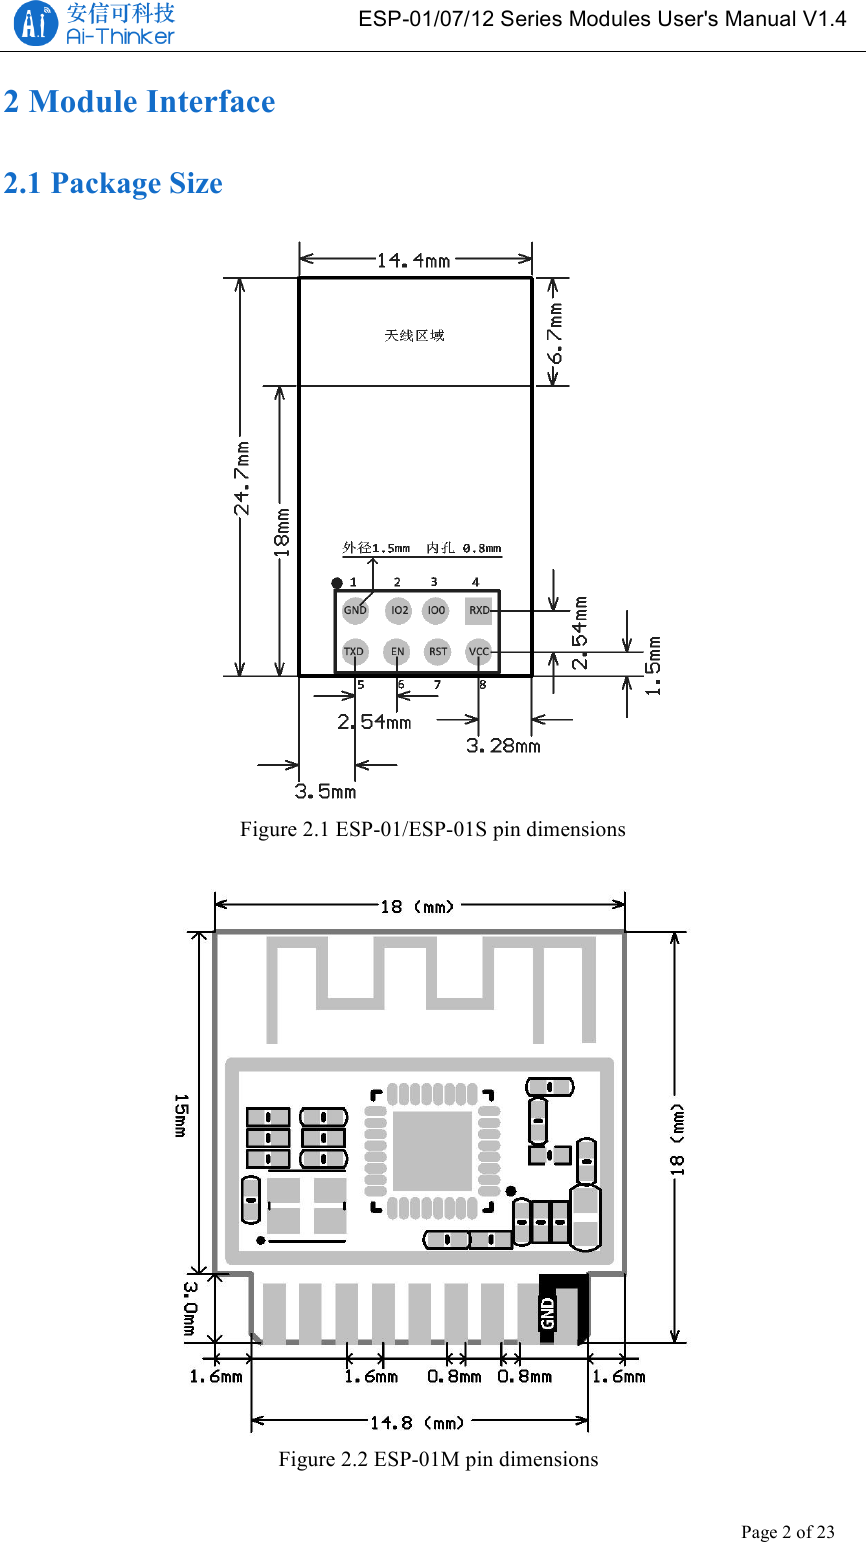   ESP-01/07/12 Series Modules User&apos;s Manual V1.4 Copyright © 2017 Shenzhen Ai-Thinker Technology Co., Ltd All Rights Reserved Page 2 of 23   2 Module Interface 2.1 Package Size   Figure 2.1 ESP-01/ESP-01S pin dimensions   Figure 2.2 ESP-01M pin dimensions  